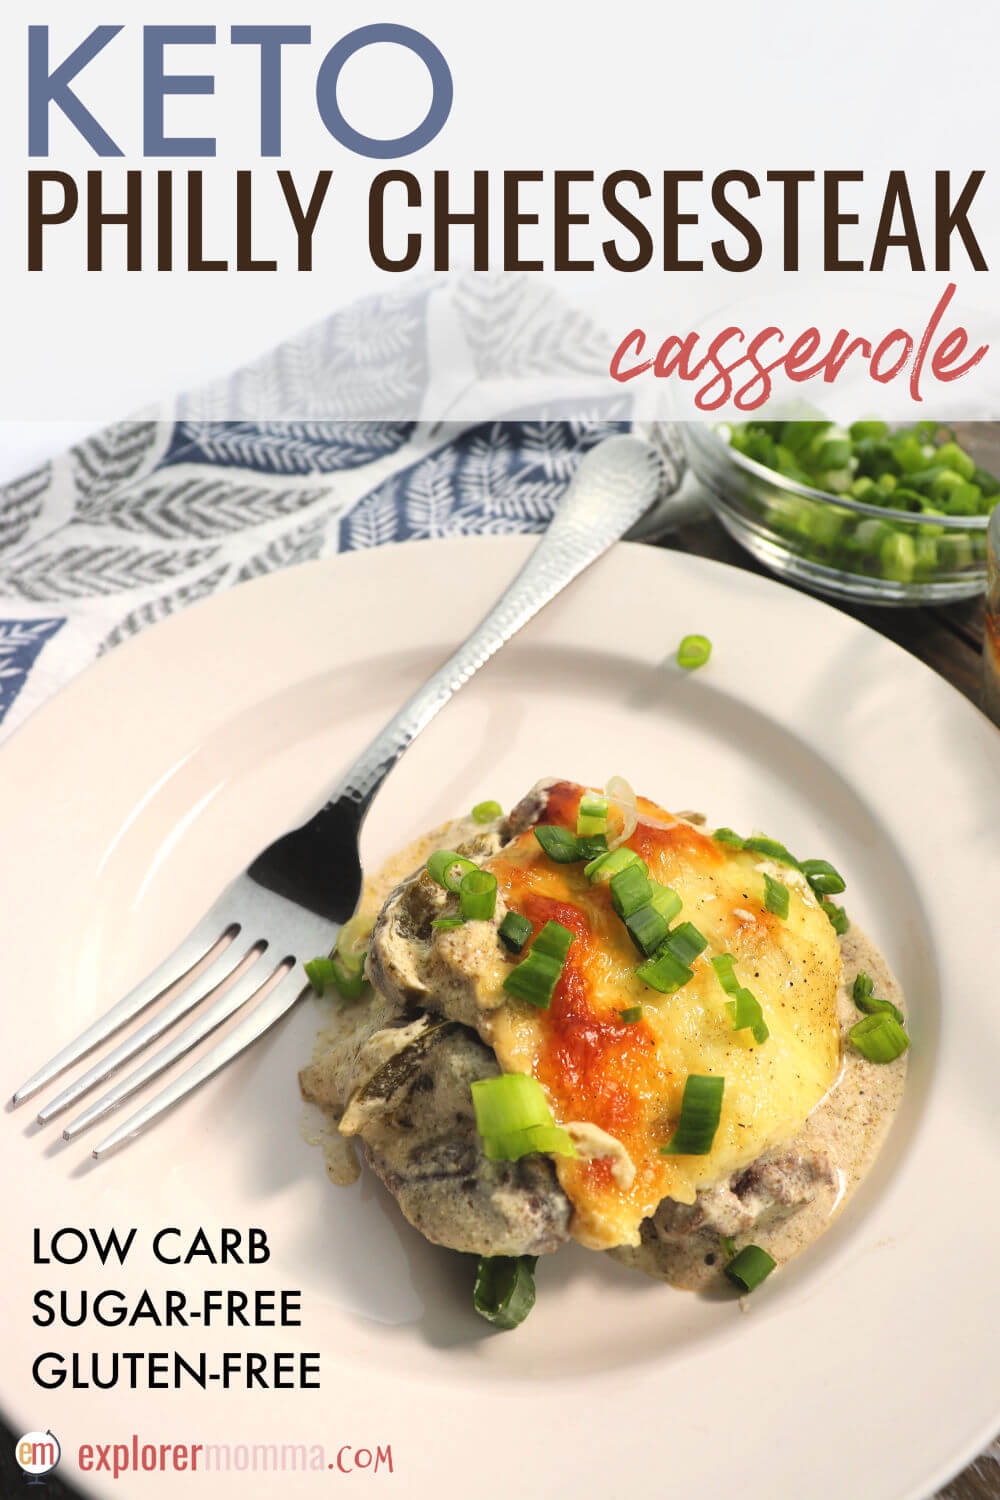 Delicious Keto Philly Cheesesteak Casserole is a great option to add to your meal prep list for a quick weeknight low carb family meal. Comforting flavors and great protein, your family will love this gluten-free dish. #ketodinner #ketorecipes